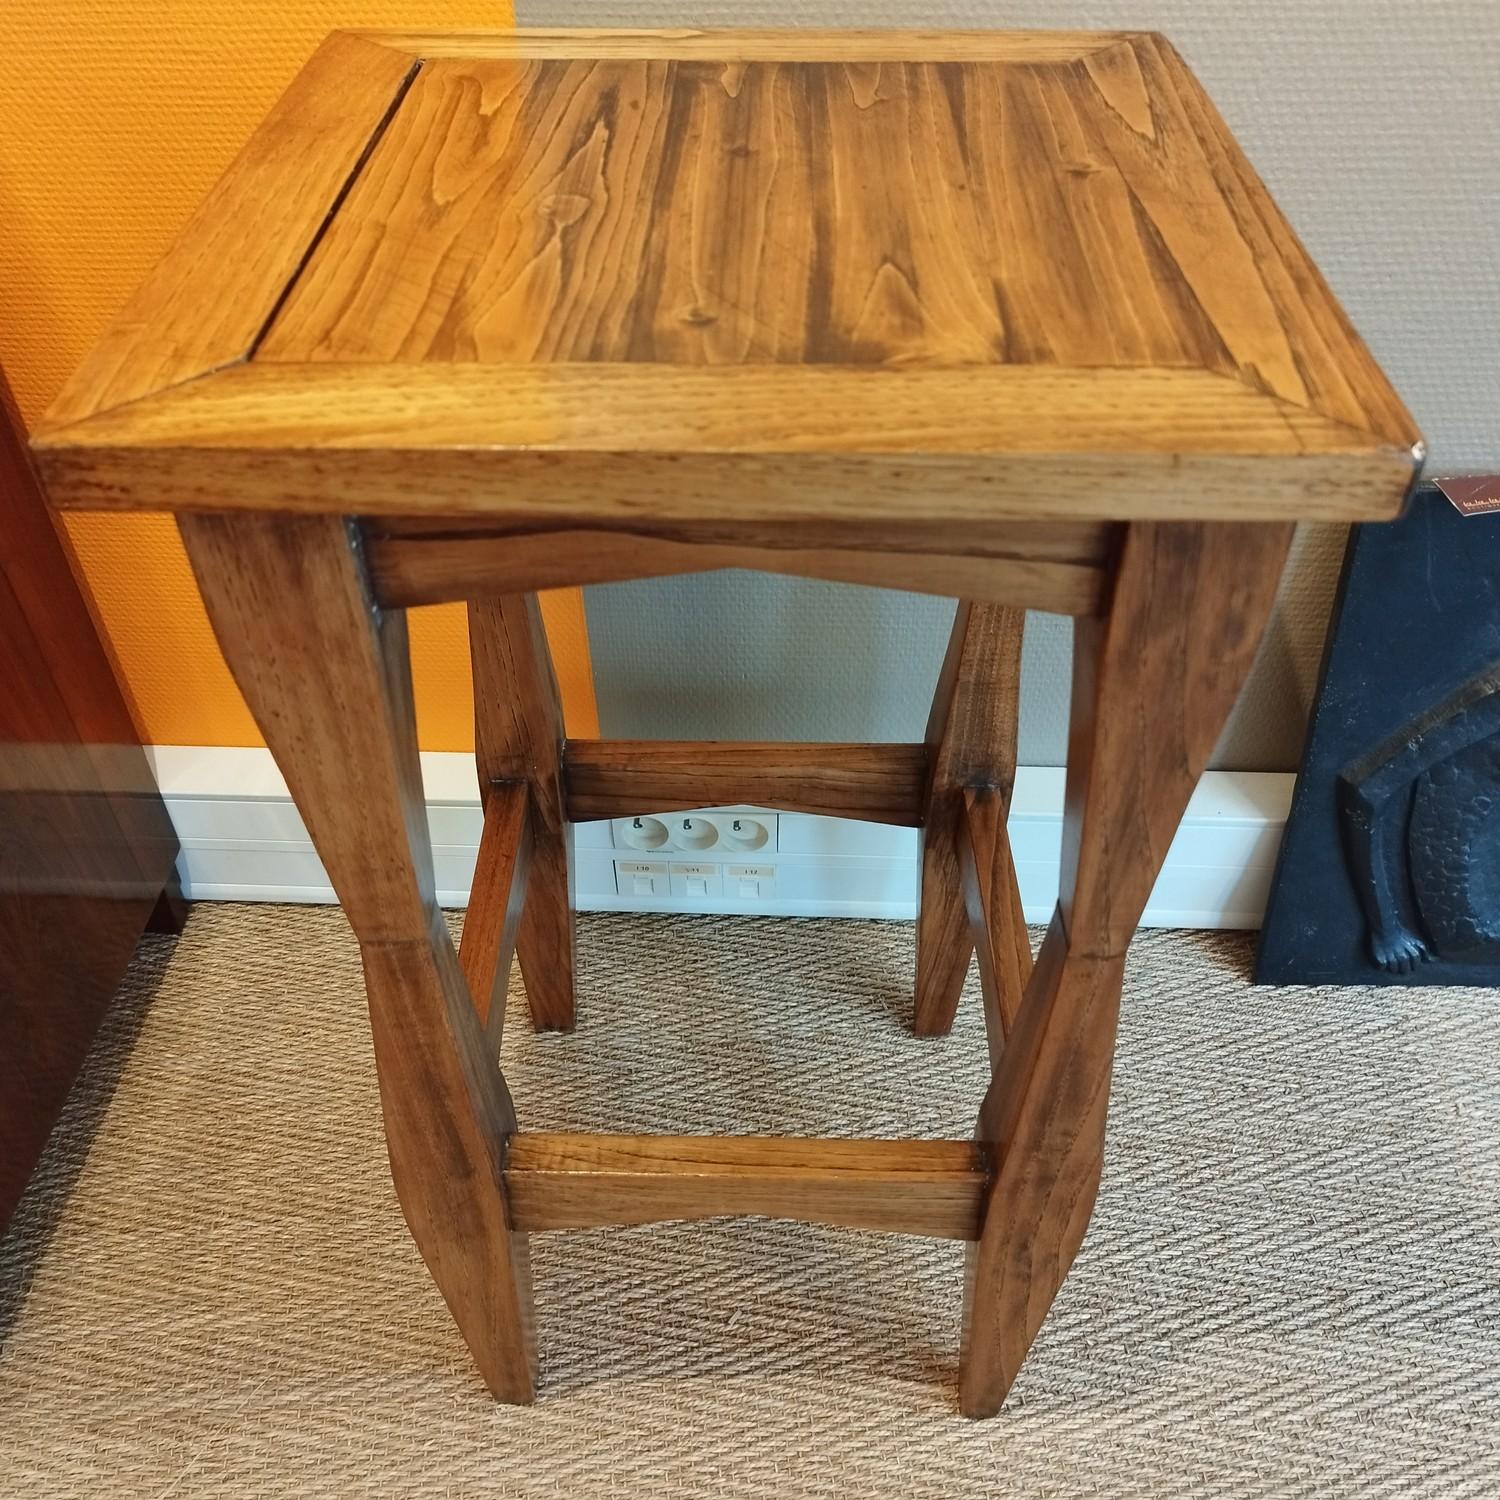 Solid elm side table/stand with double tappered legs. Nice color and patina.
Do not hesitate to ask me for a shipping quote.